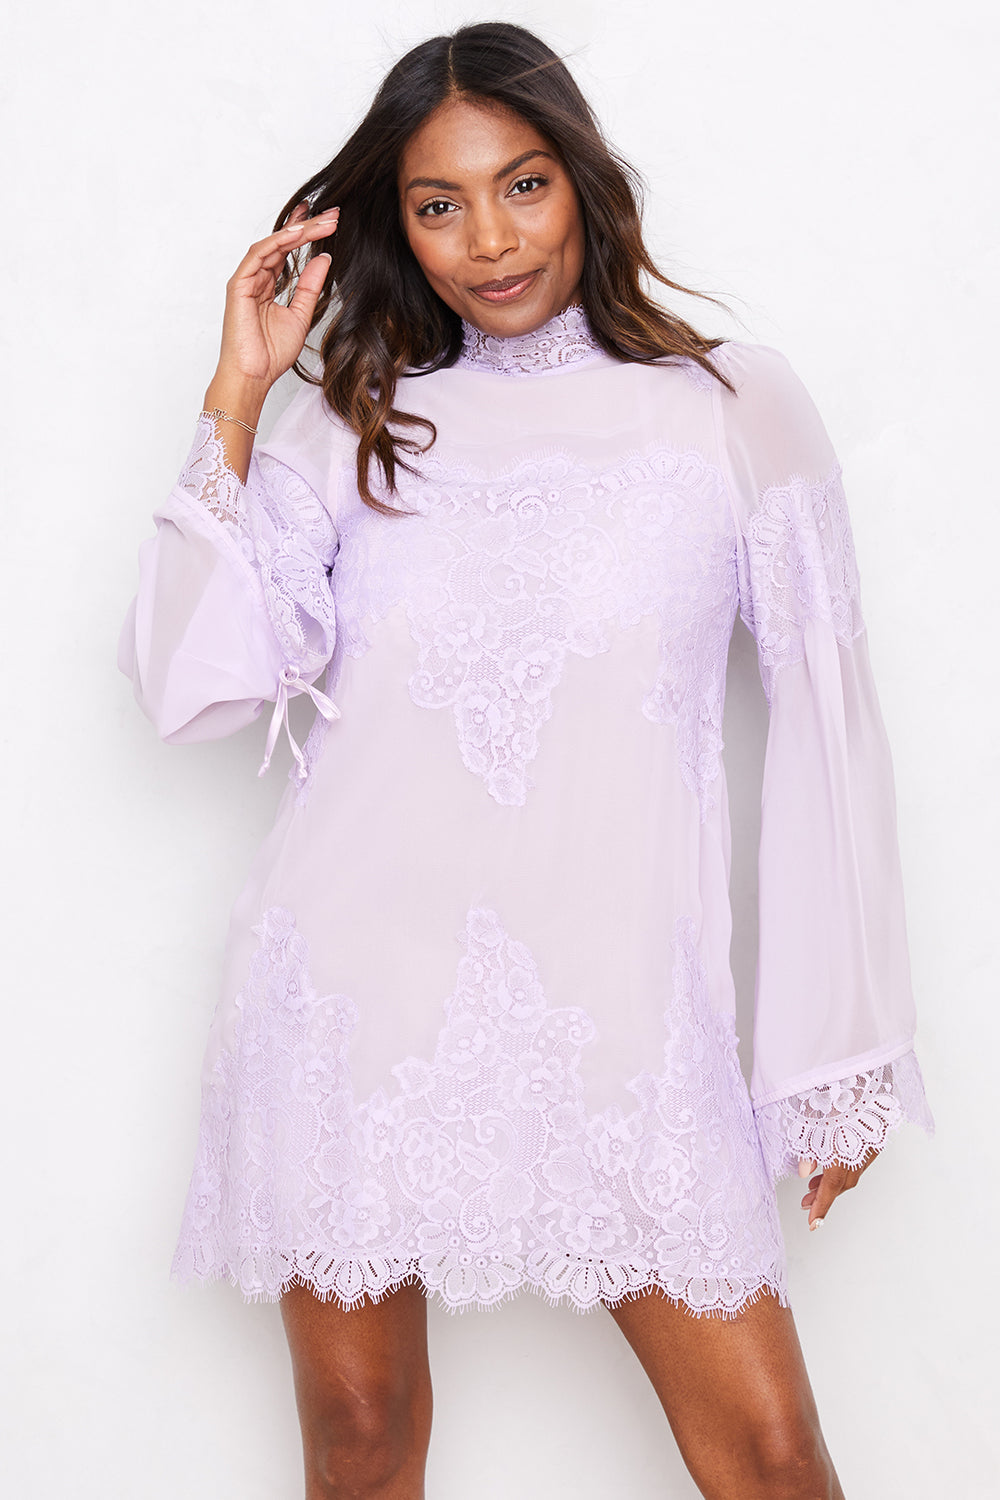 Queen 4 A Day Dress | Lavender